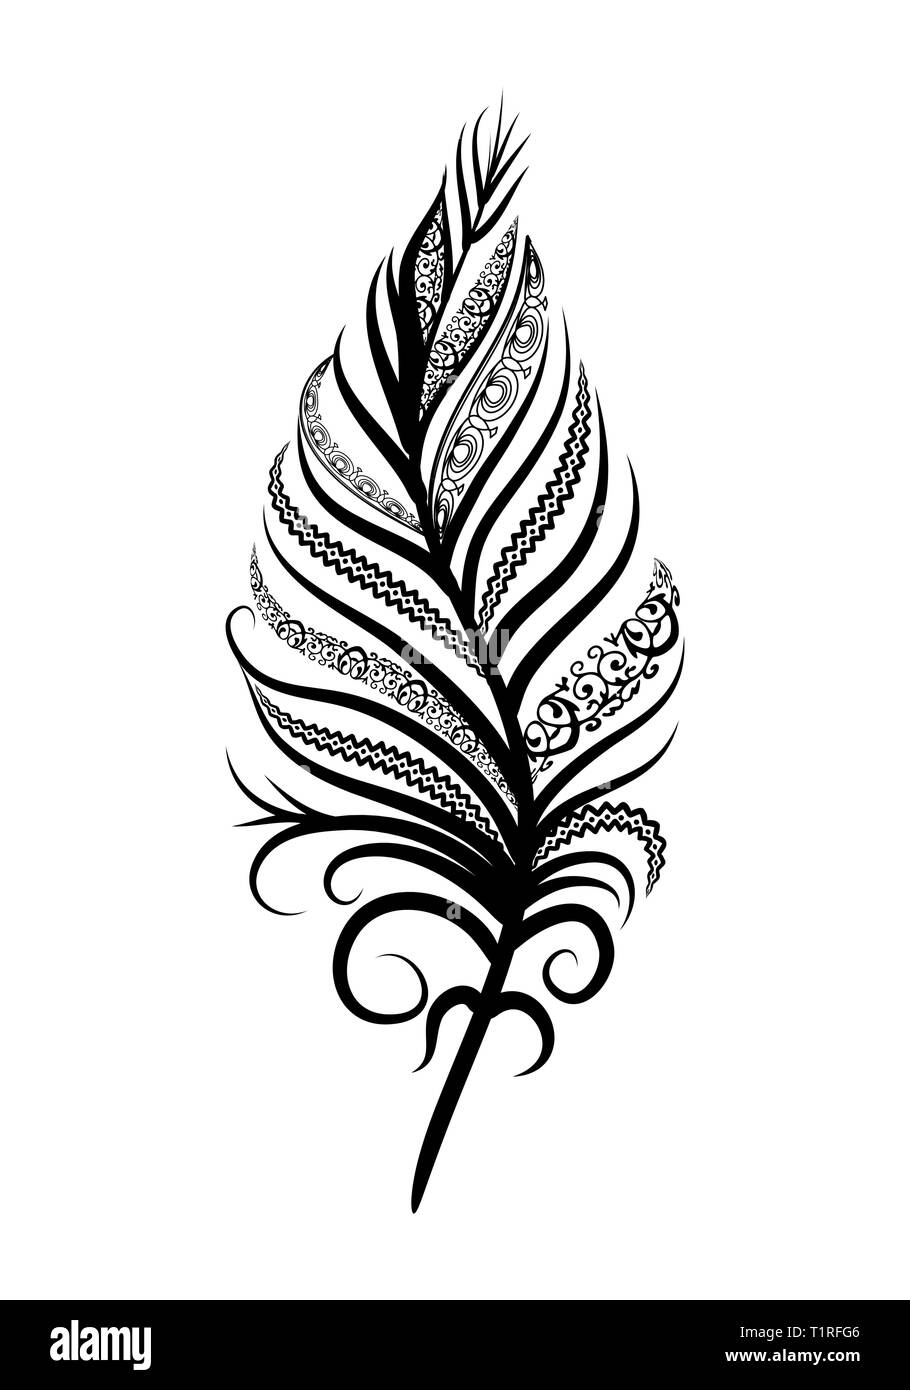 100 Best Feather Tattoo Designs with Images